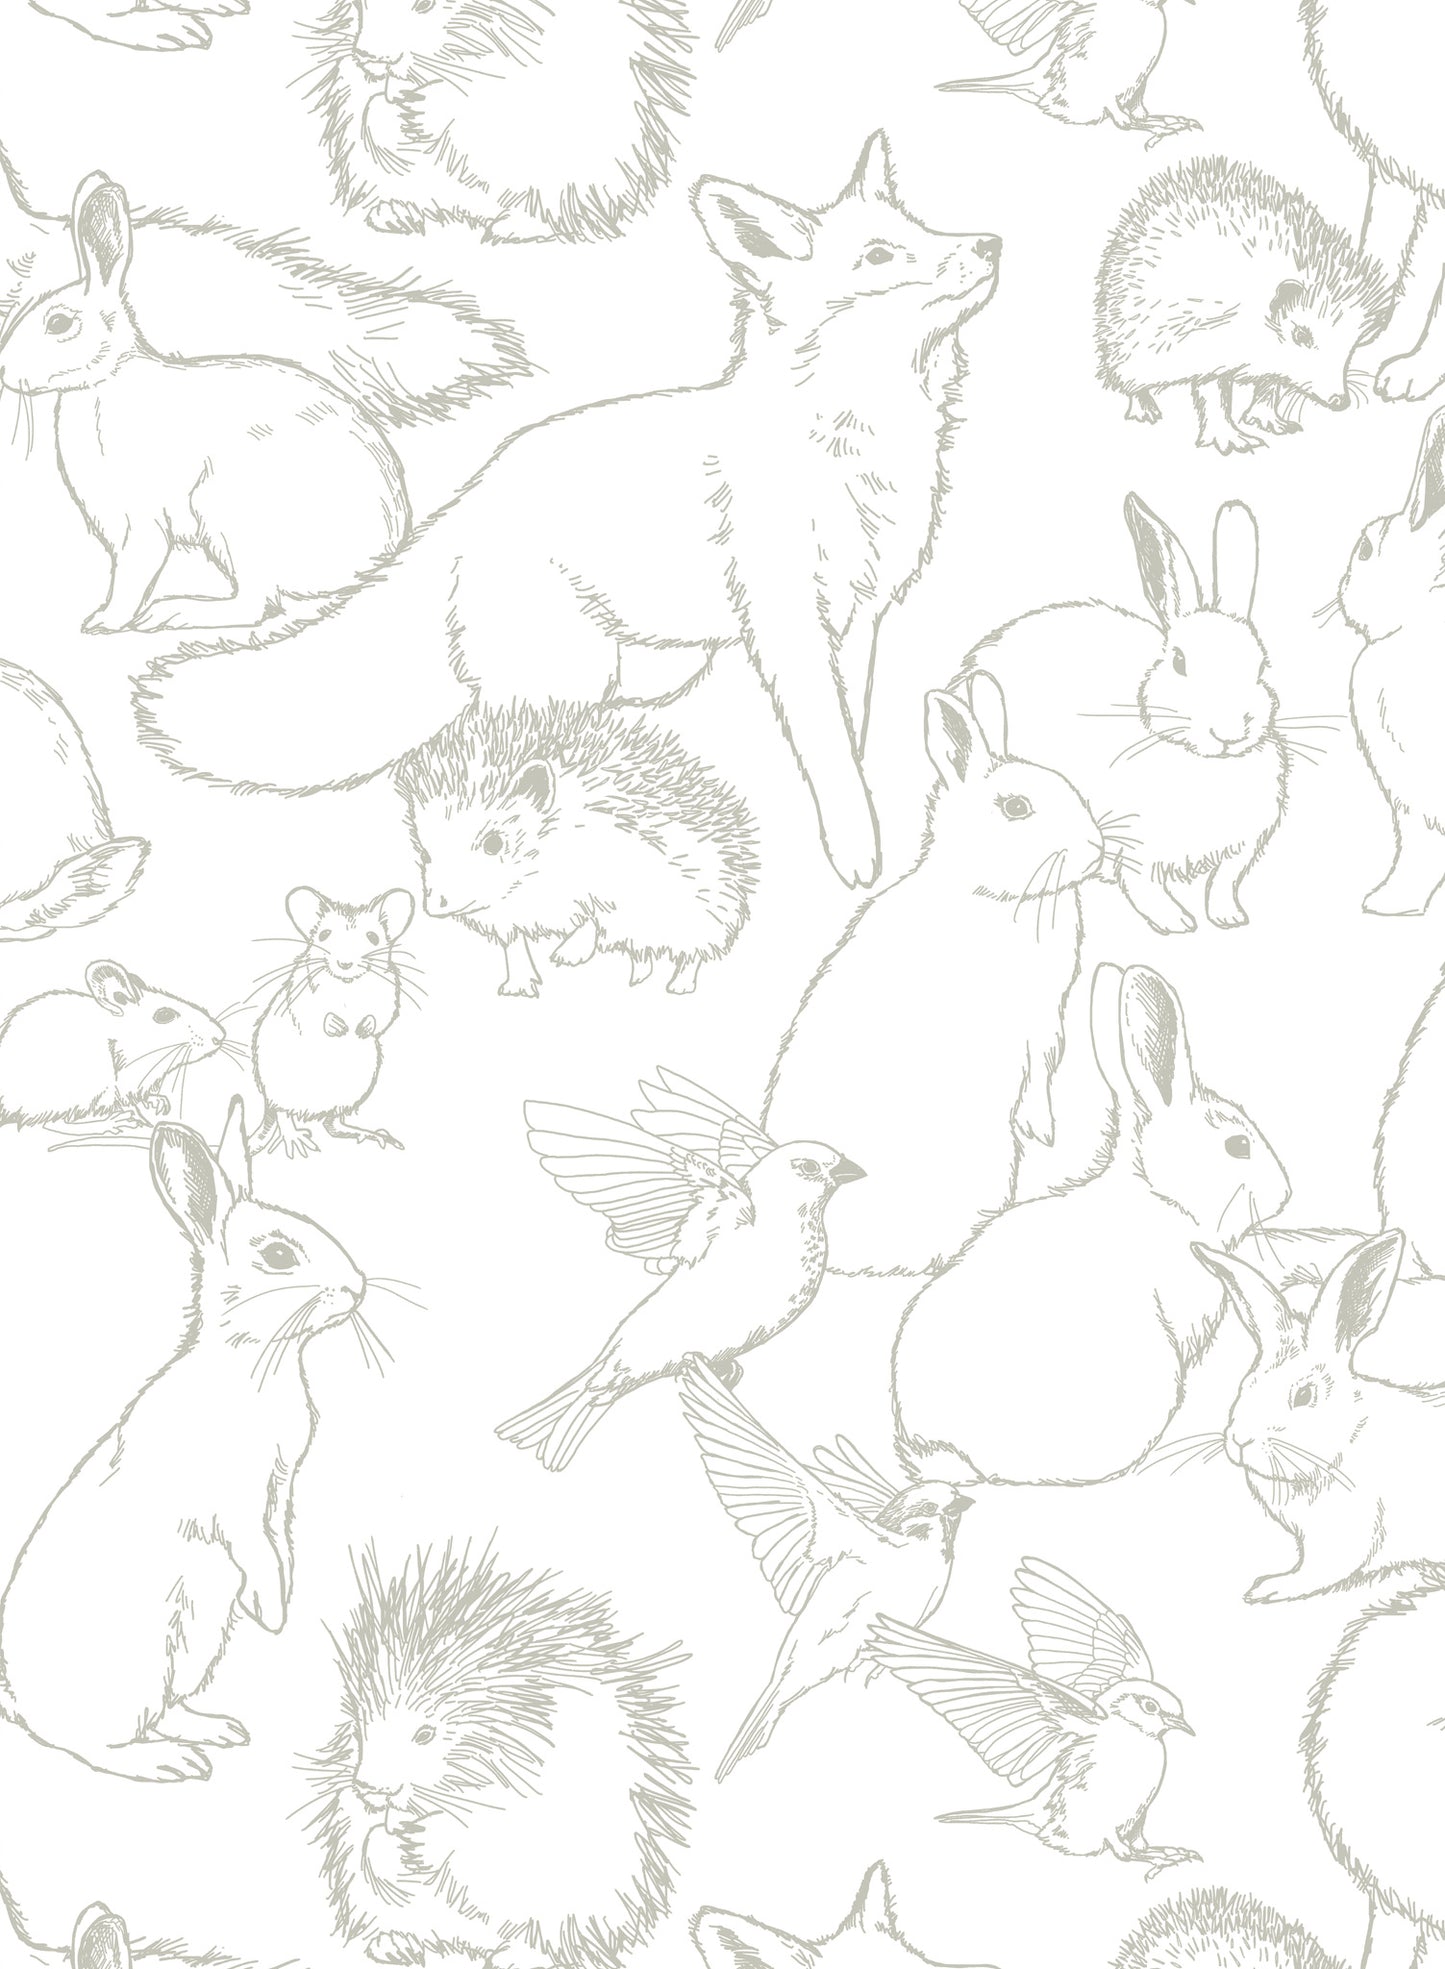 Hundred Acre Wood ia a Minimalist wallpaper by Opposite Wall of a small animals of the forest